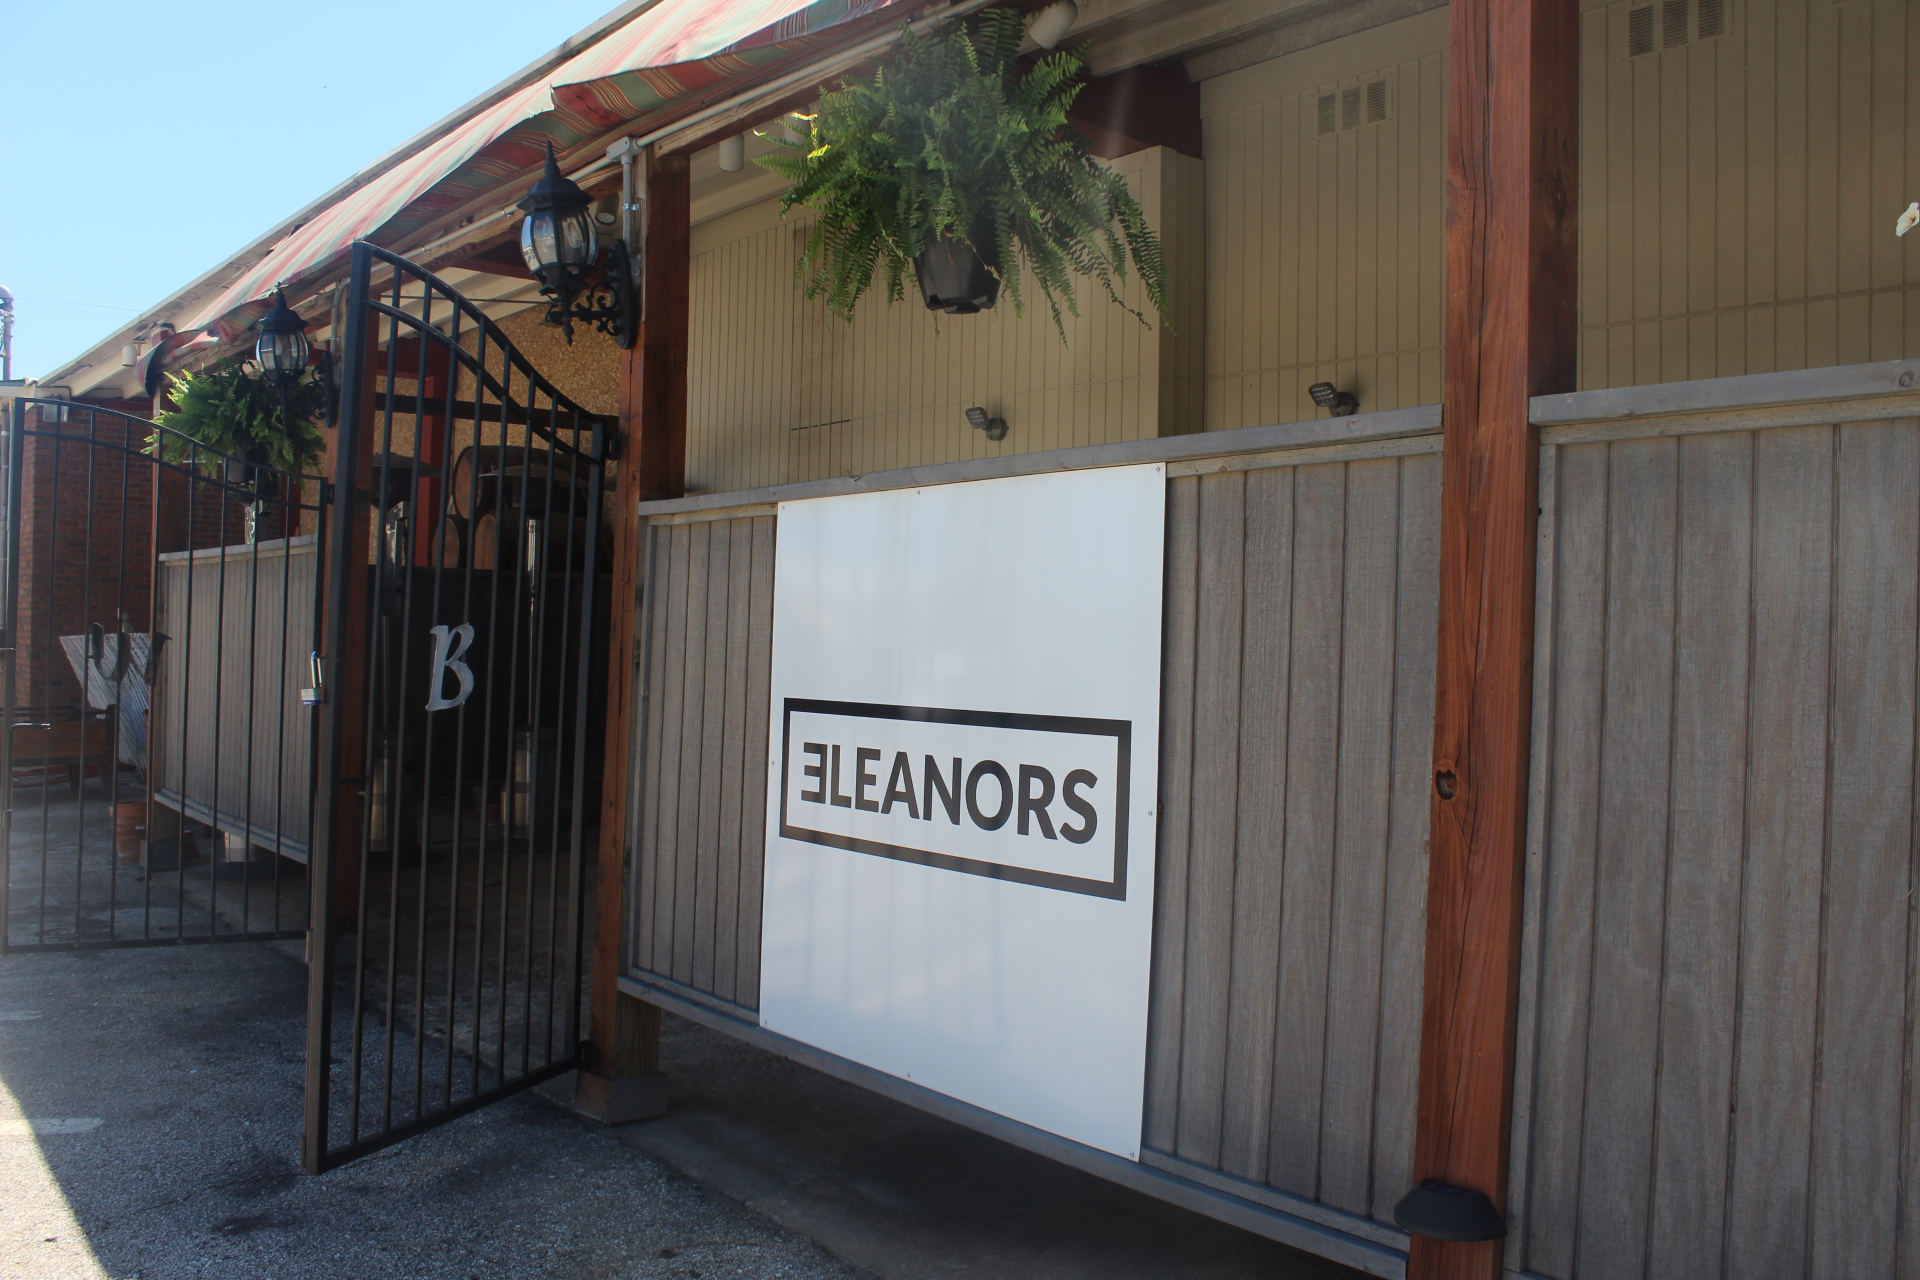 Eleanor’s Restaurant to hold soft opening June 15